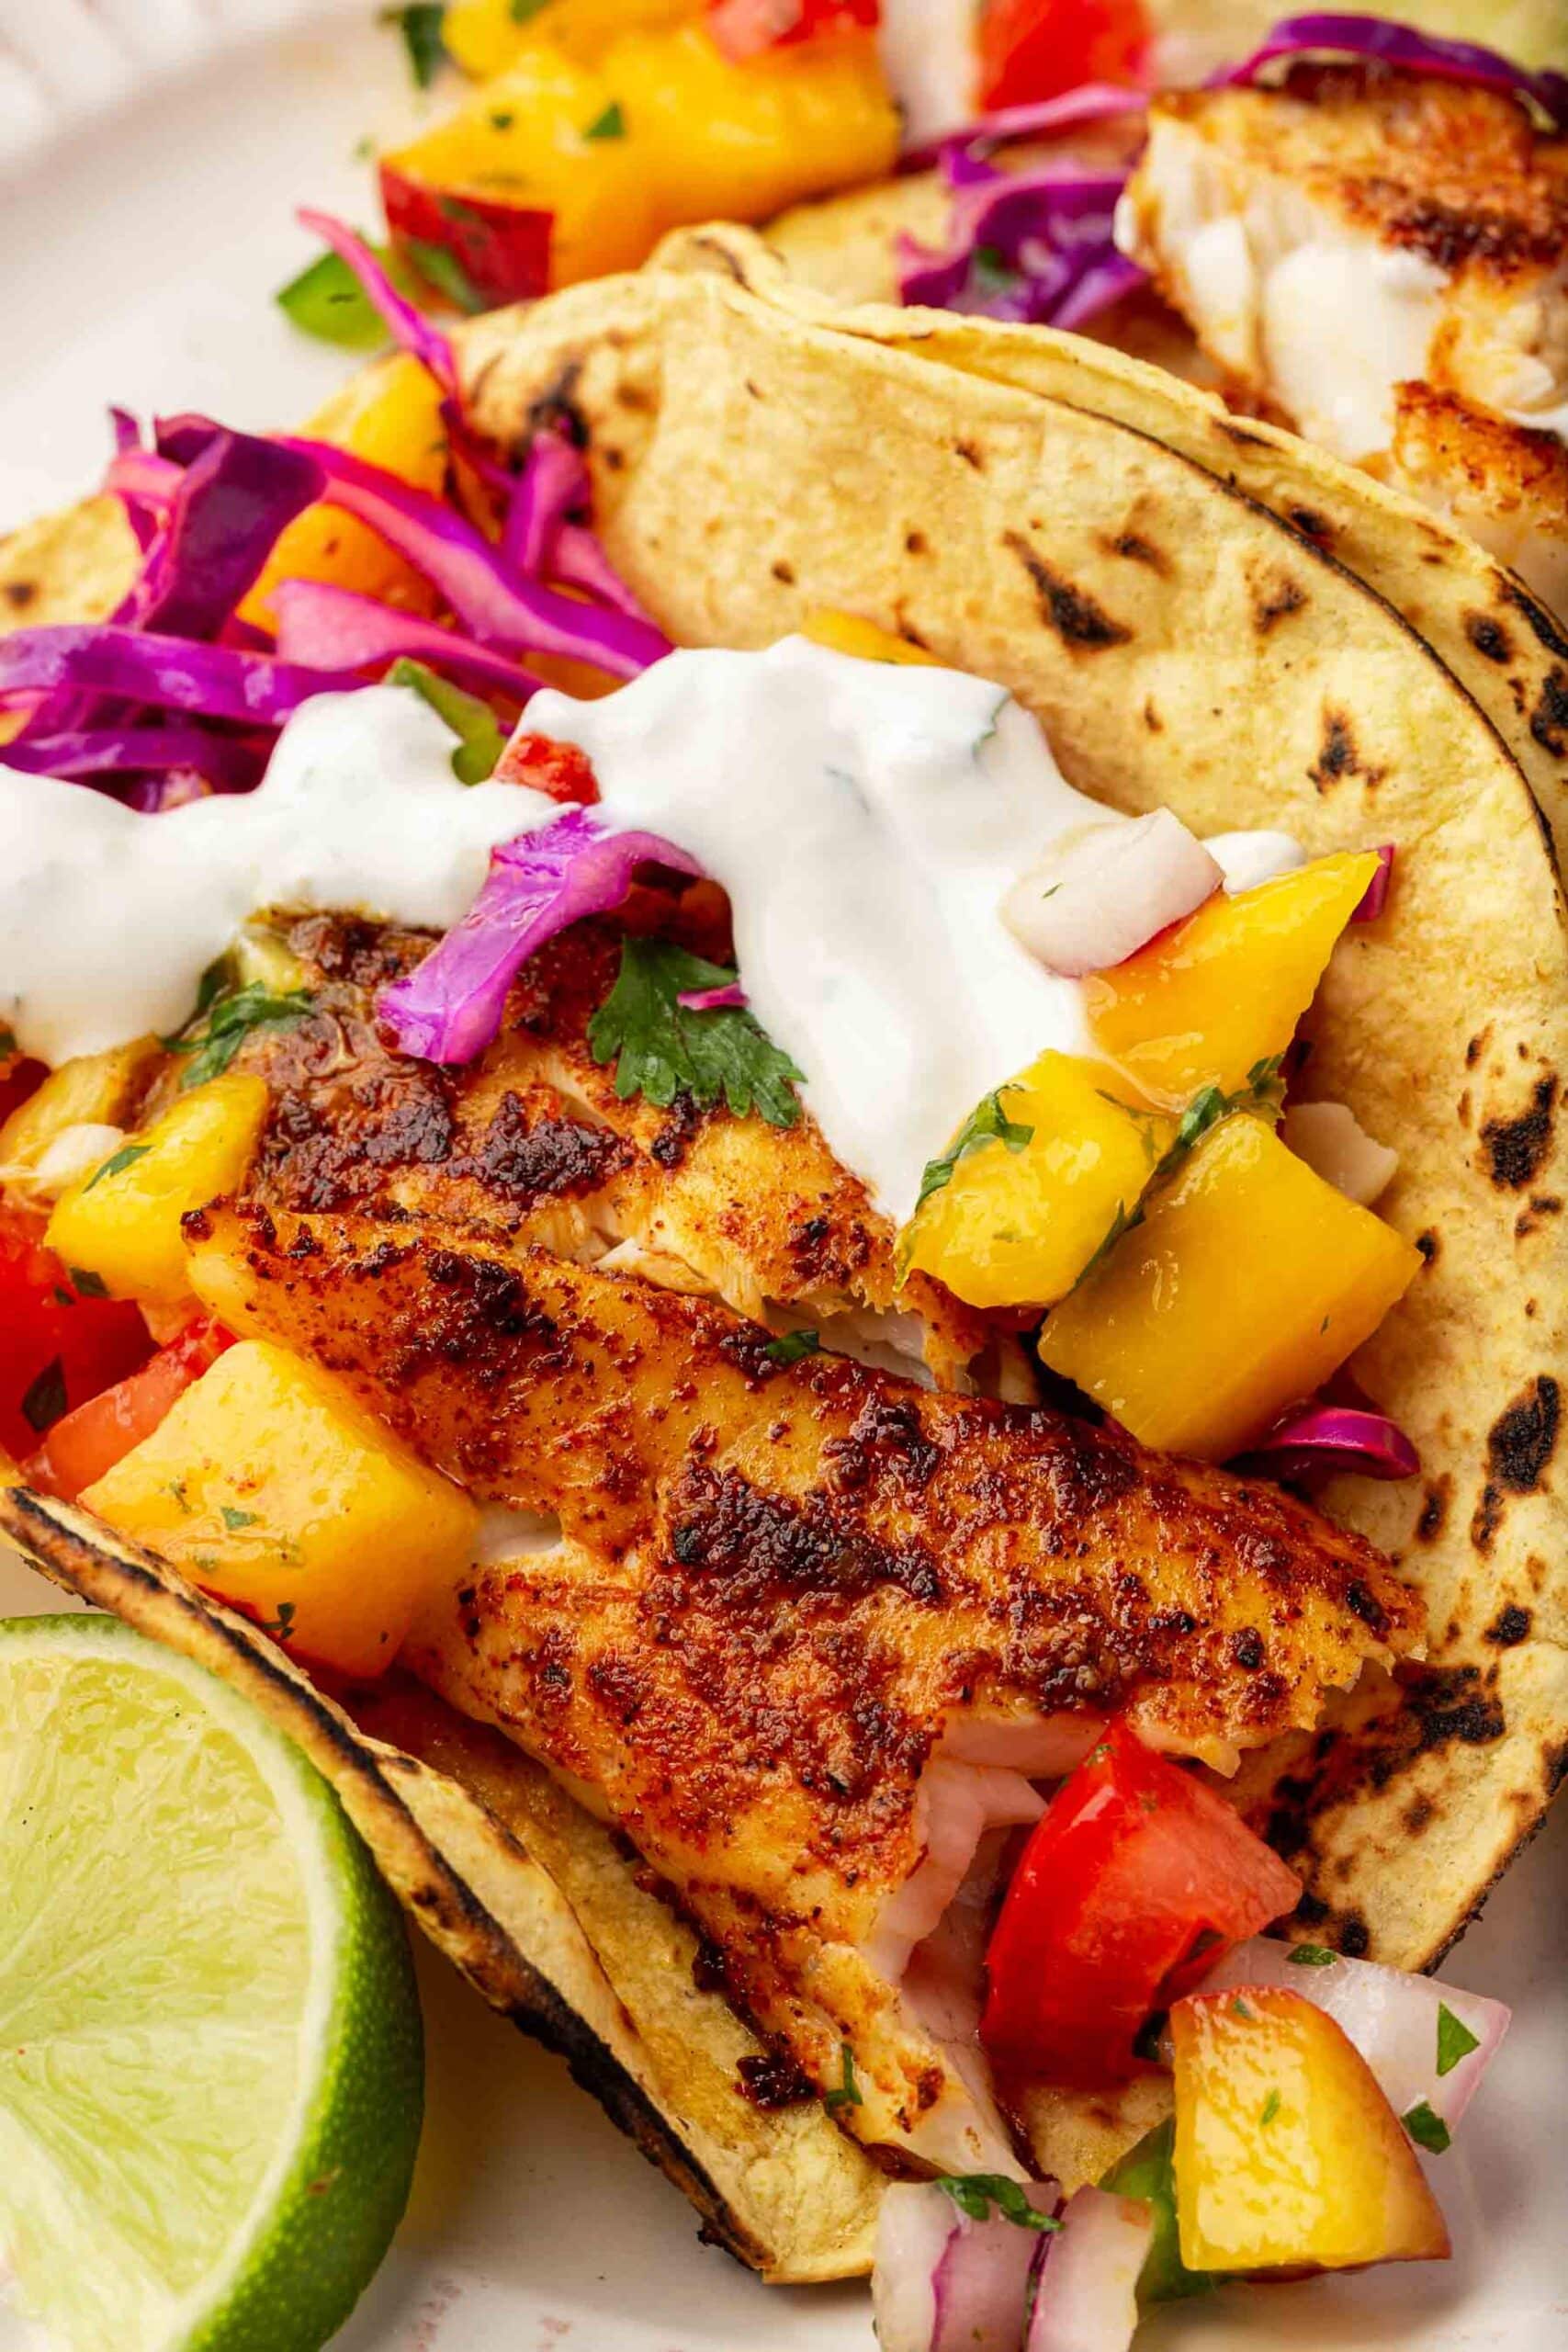 A close up of a tilapia fish taco topped with crema, fruit salsa, red cabbage slaw and cilantro on charred corn tortilla.